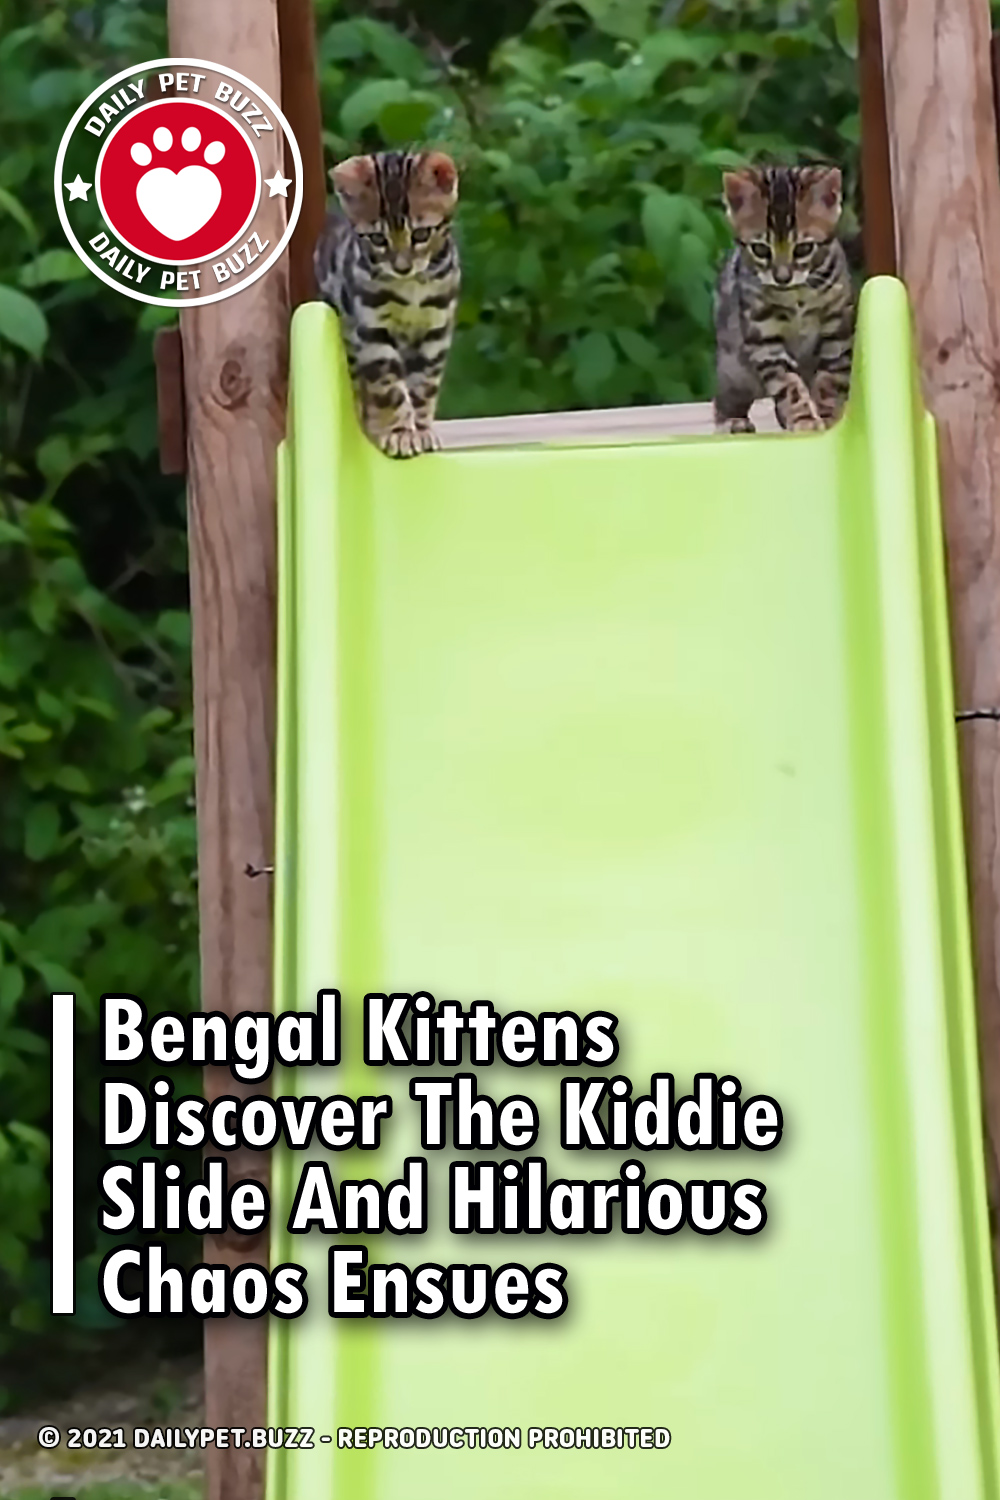 Bengal Kittens Discover The Kiddie Slide And Hilarious Chaos Ensues